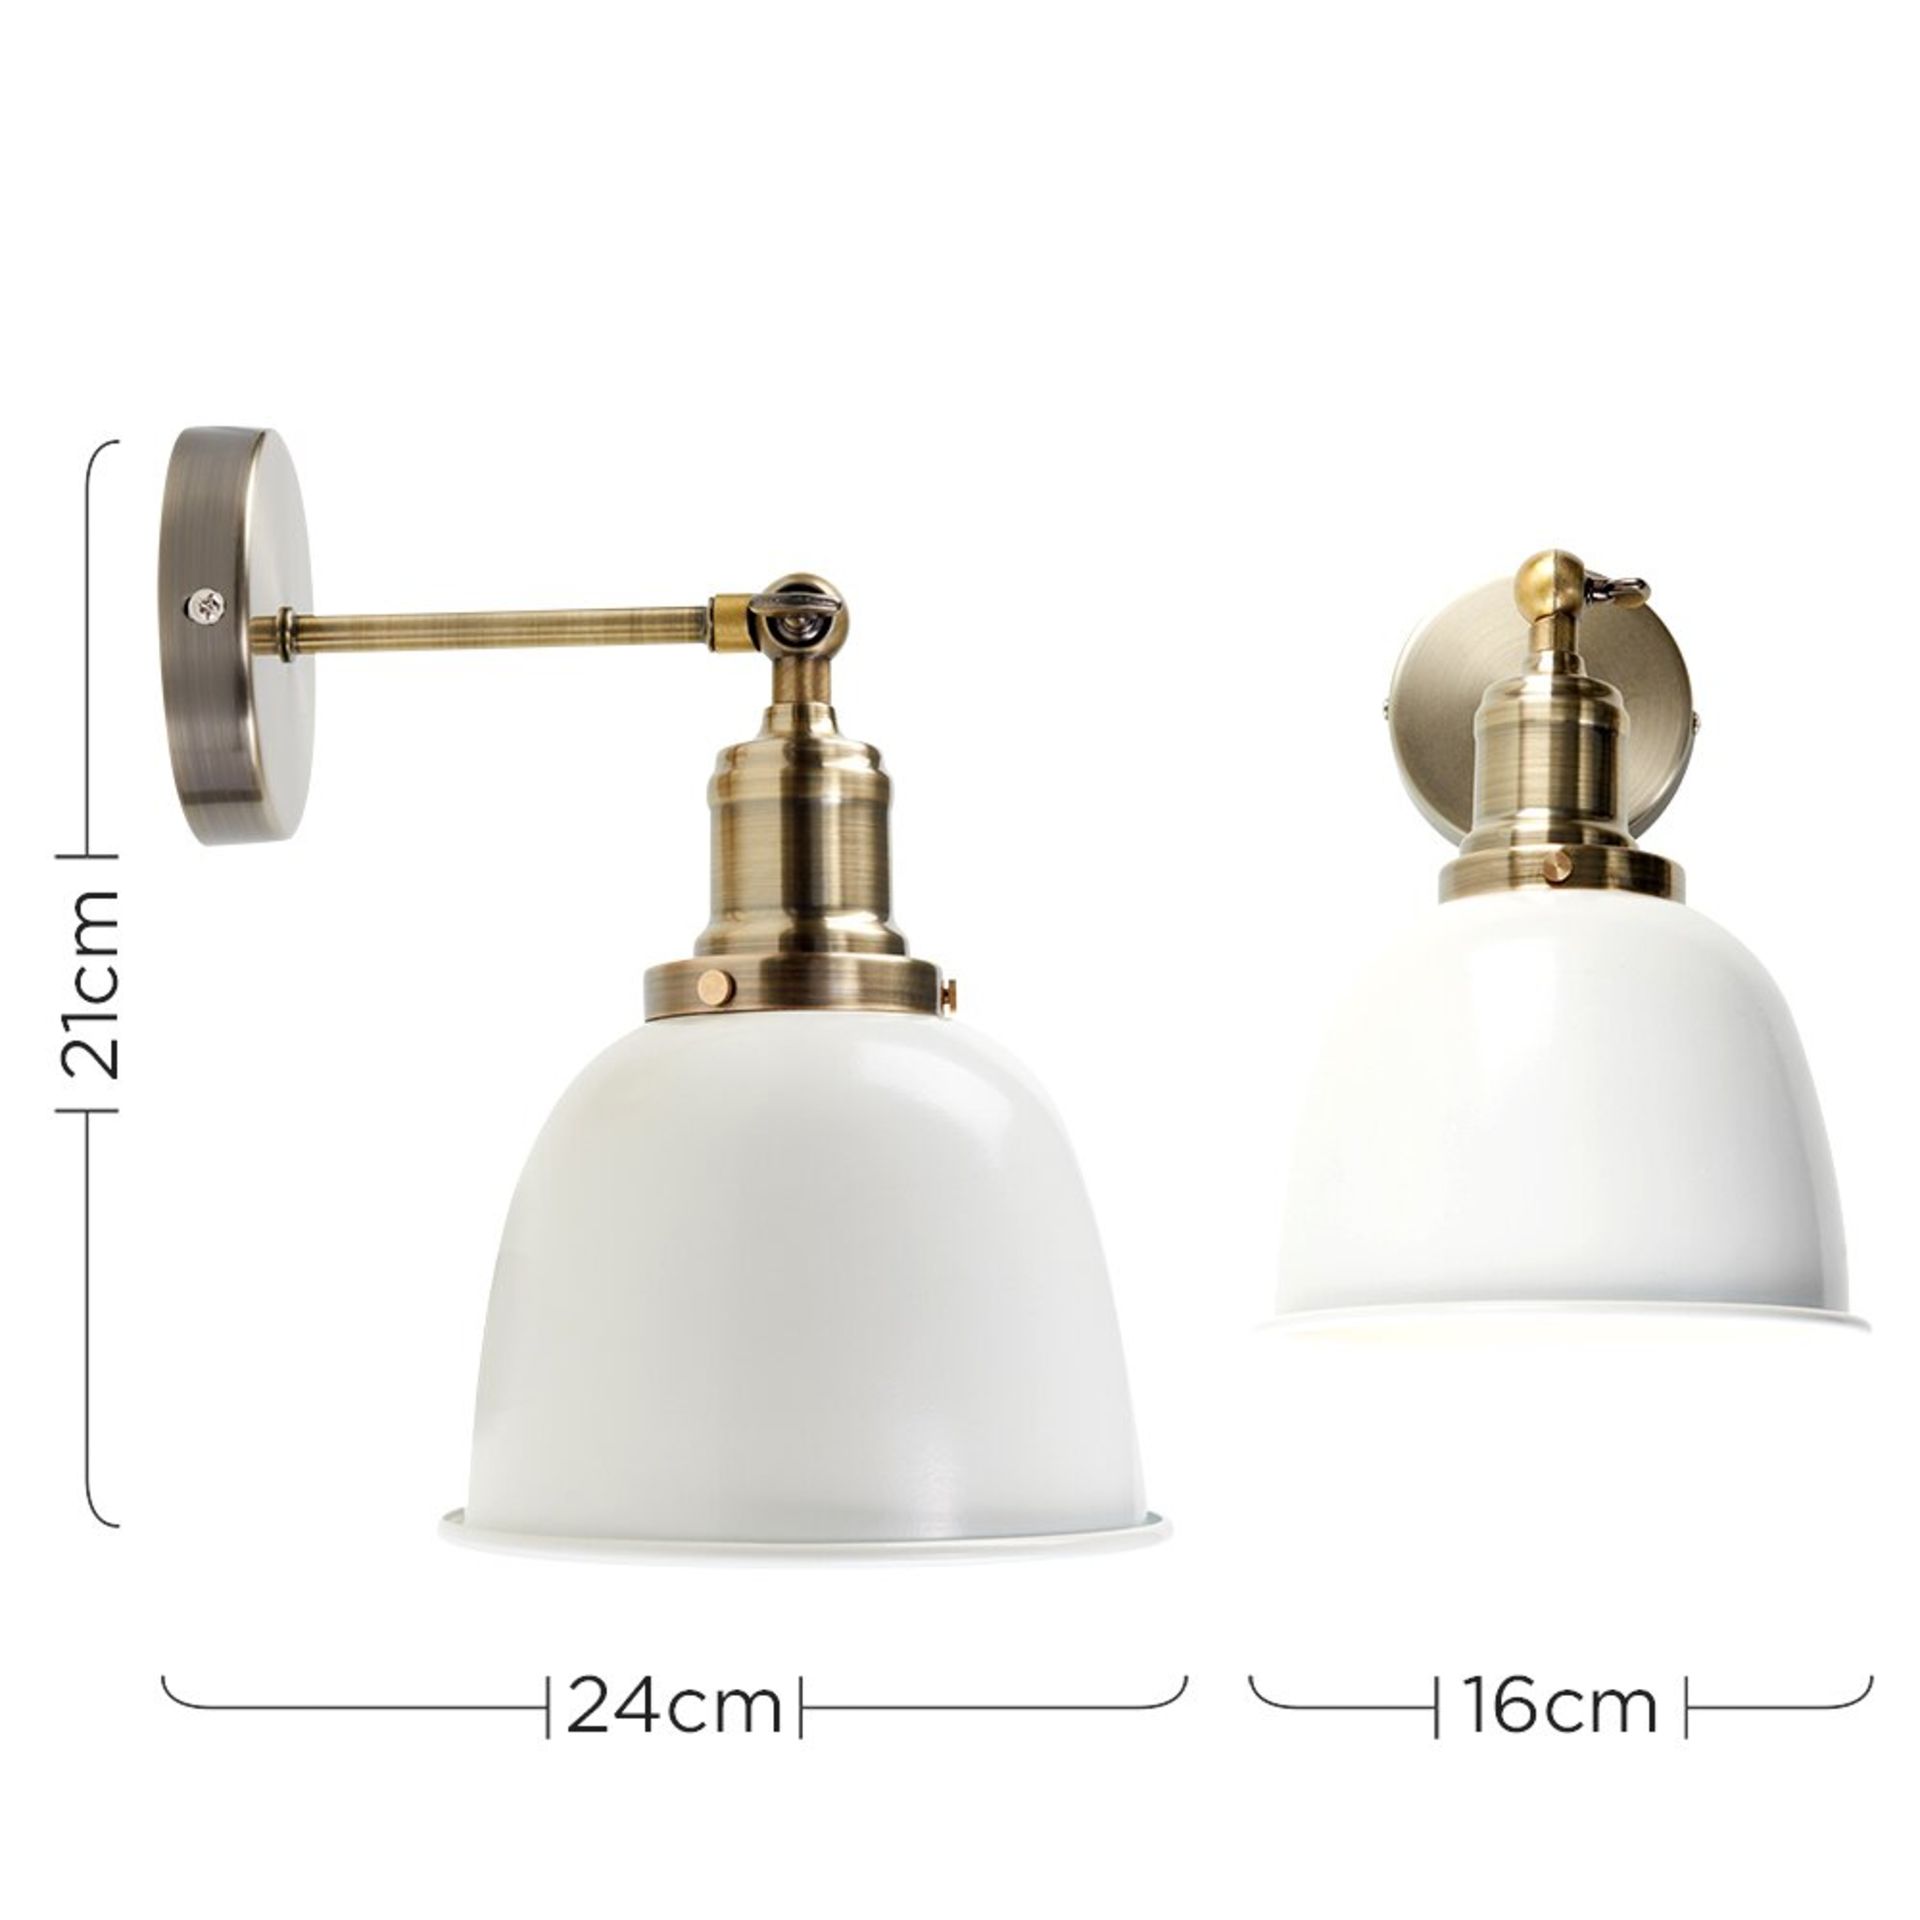 HARMAN 2-LIGHT ARMED SCONCE, NO BULD INCLUDED, RRP £54.49